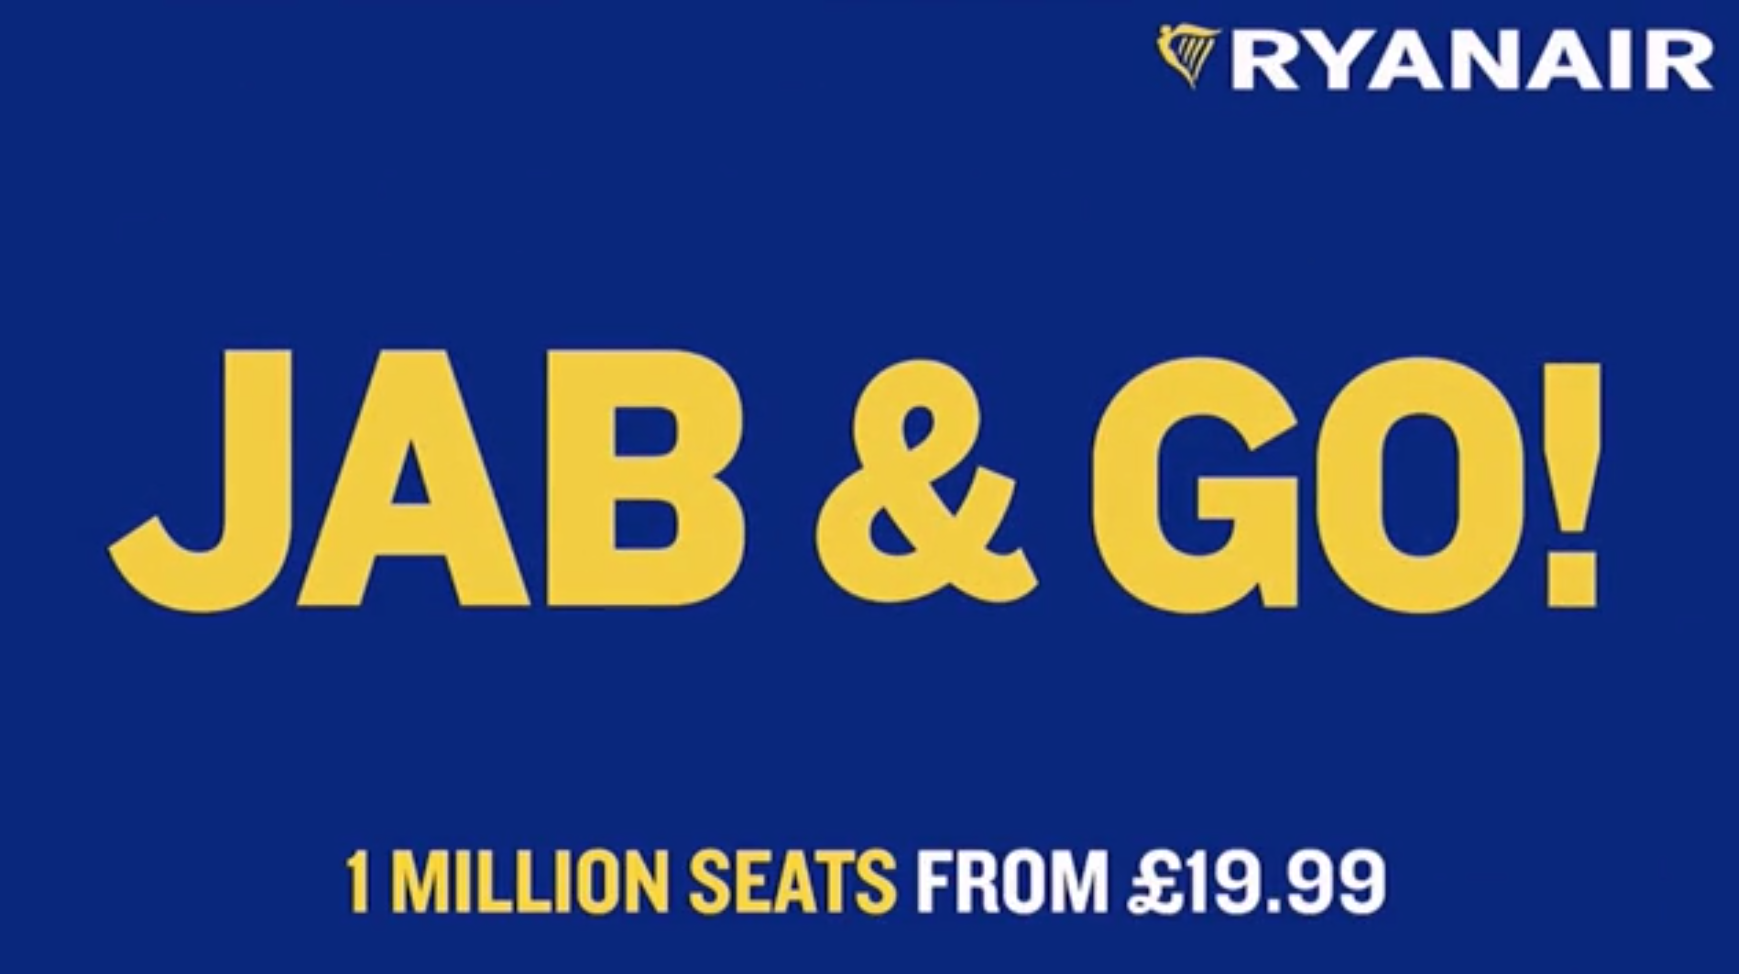 Ryanair 'jab and go' advert sparks controversy | The Independent